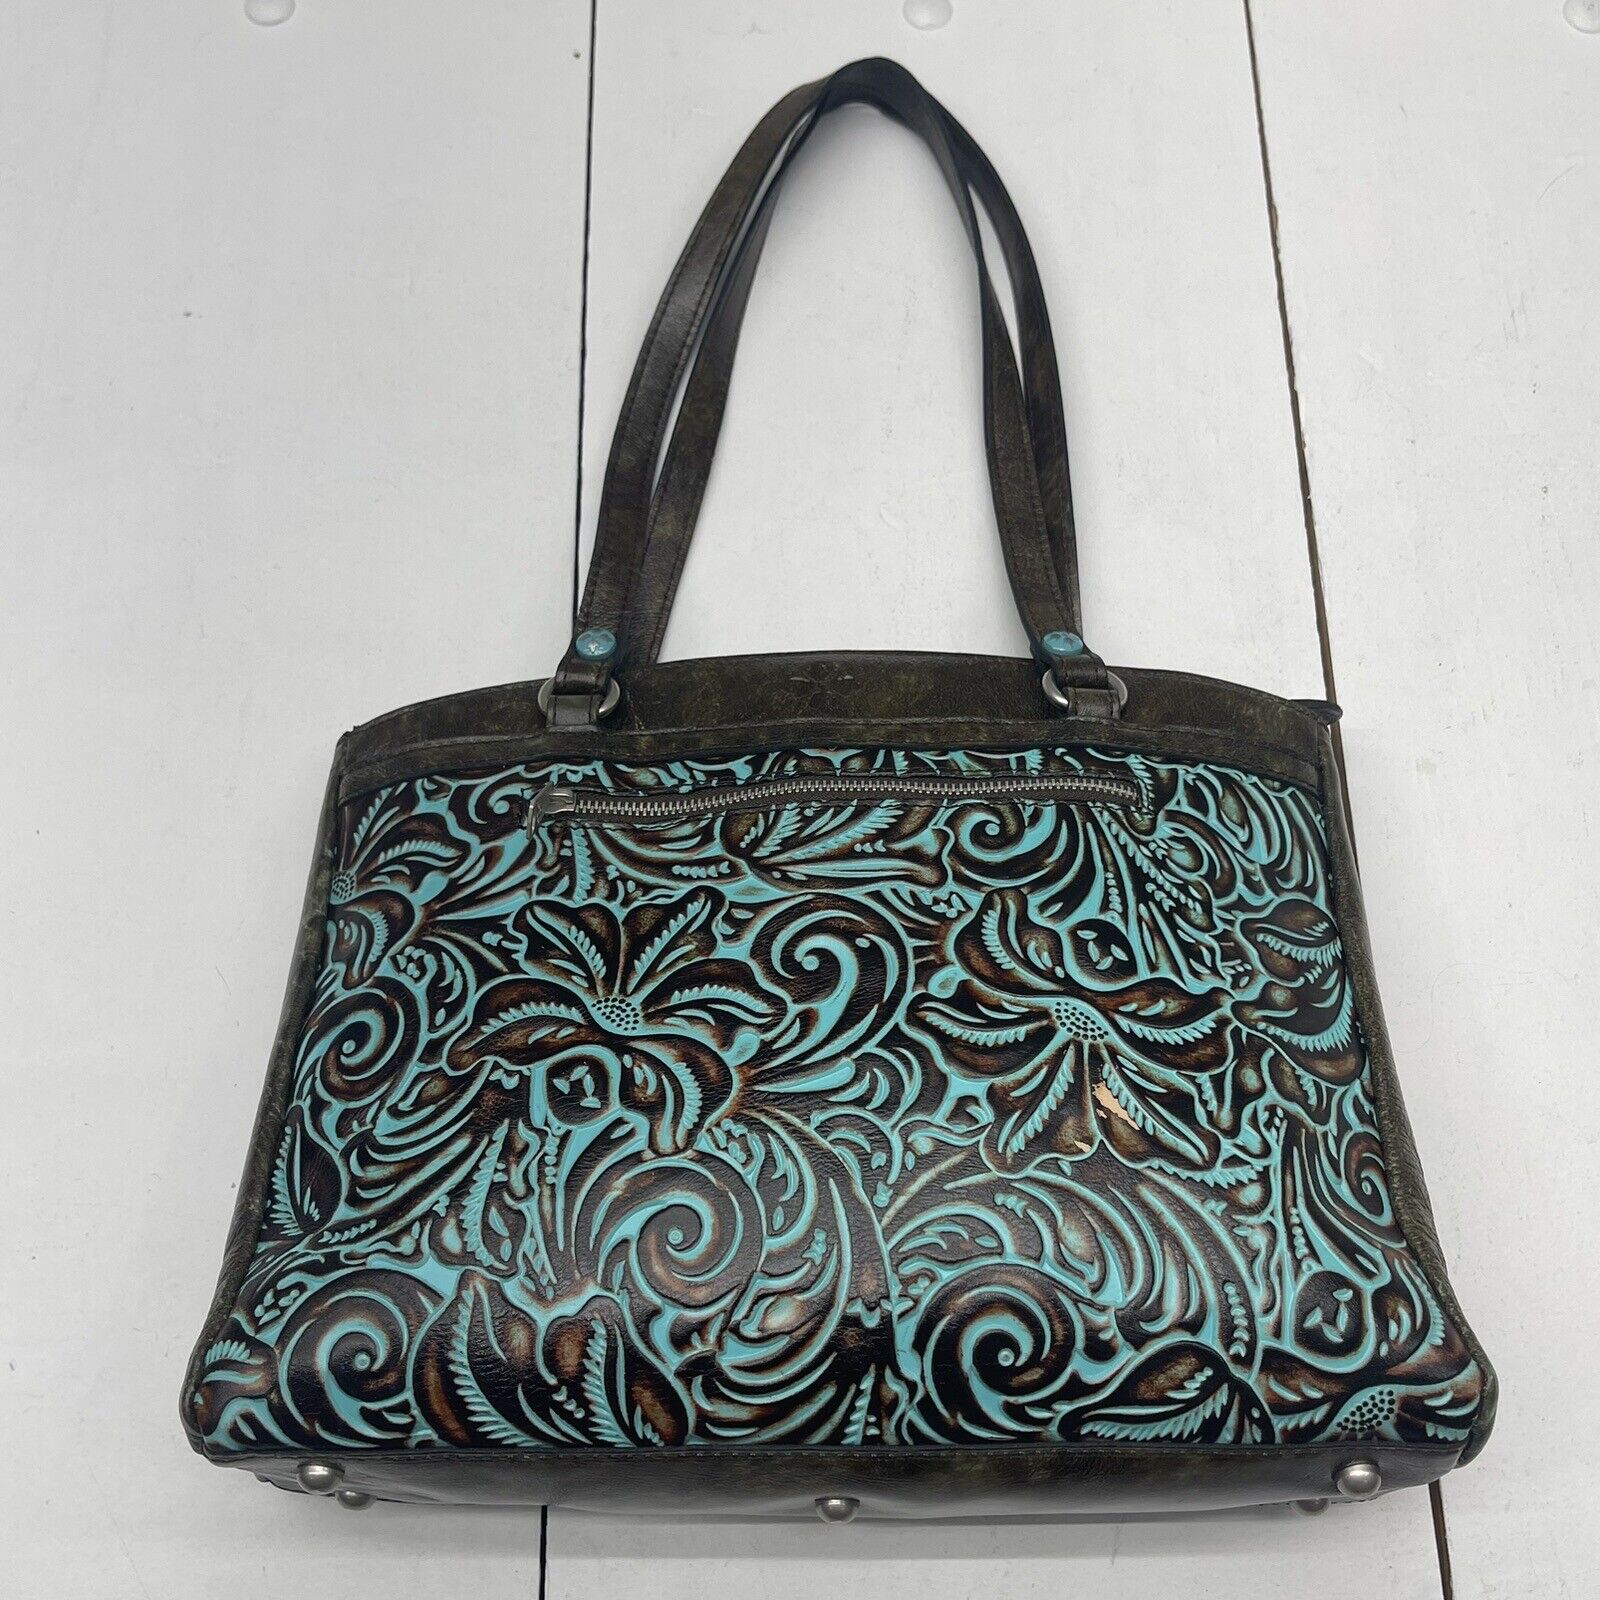 Patricia Nash Poppy Turquoise Tooled Leather Tote Purse $249